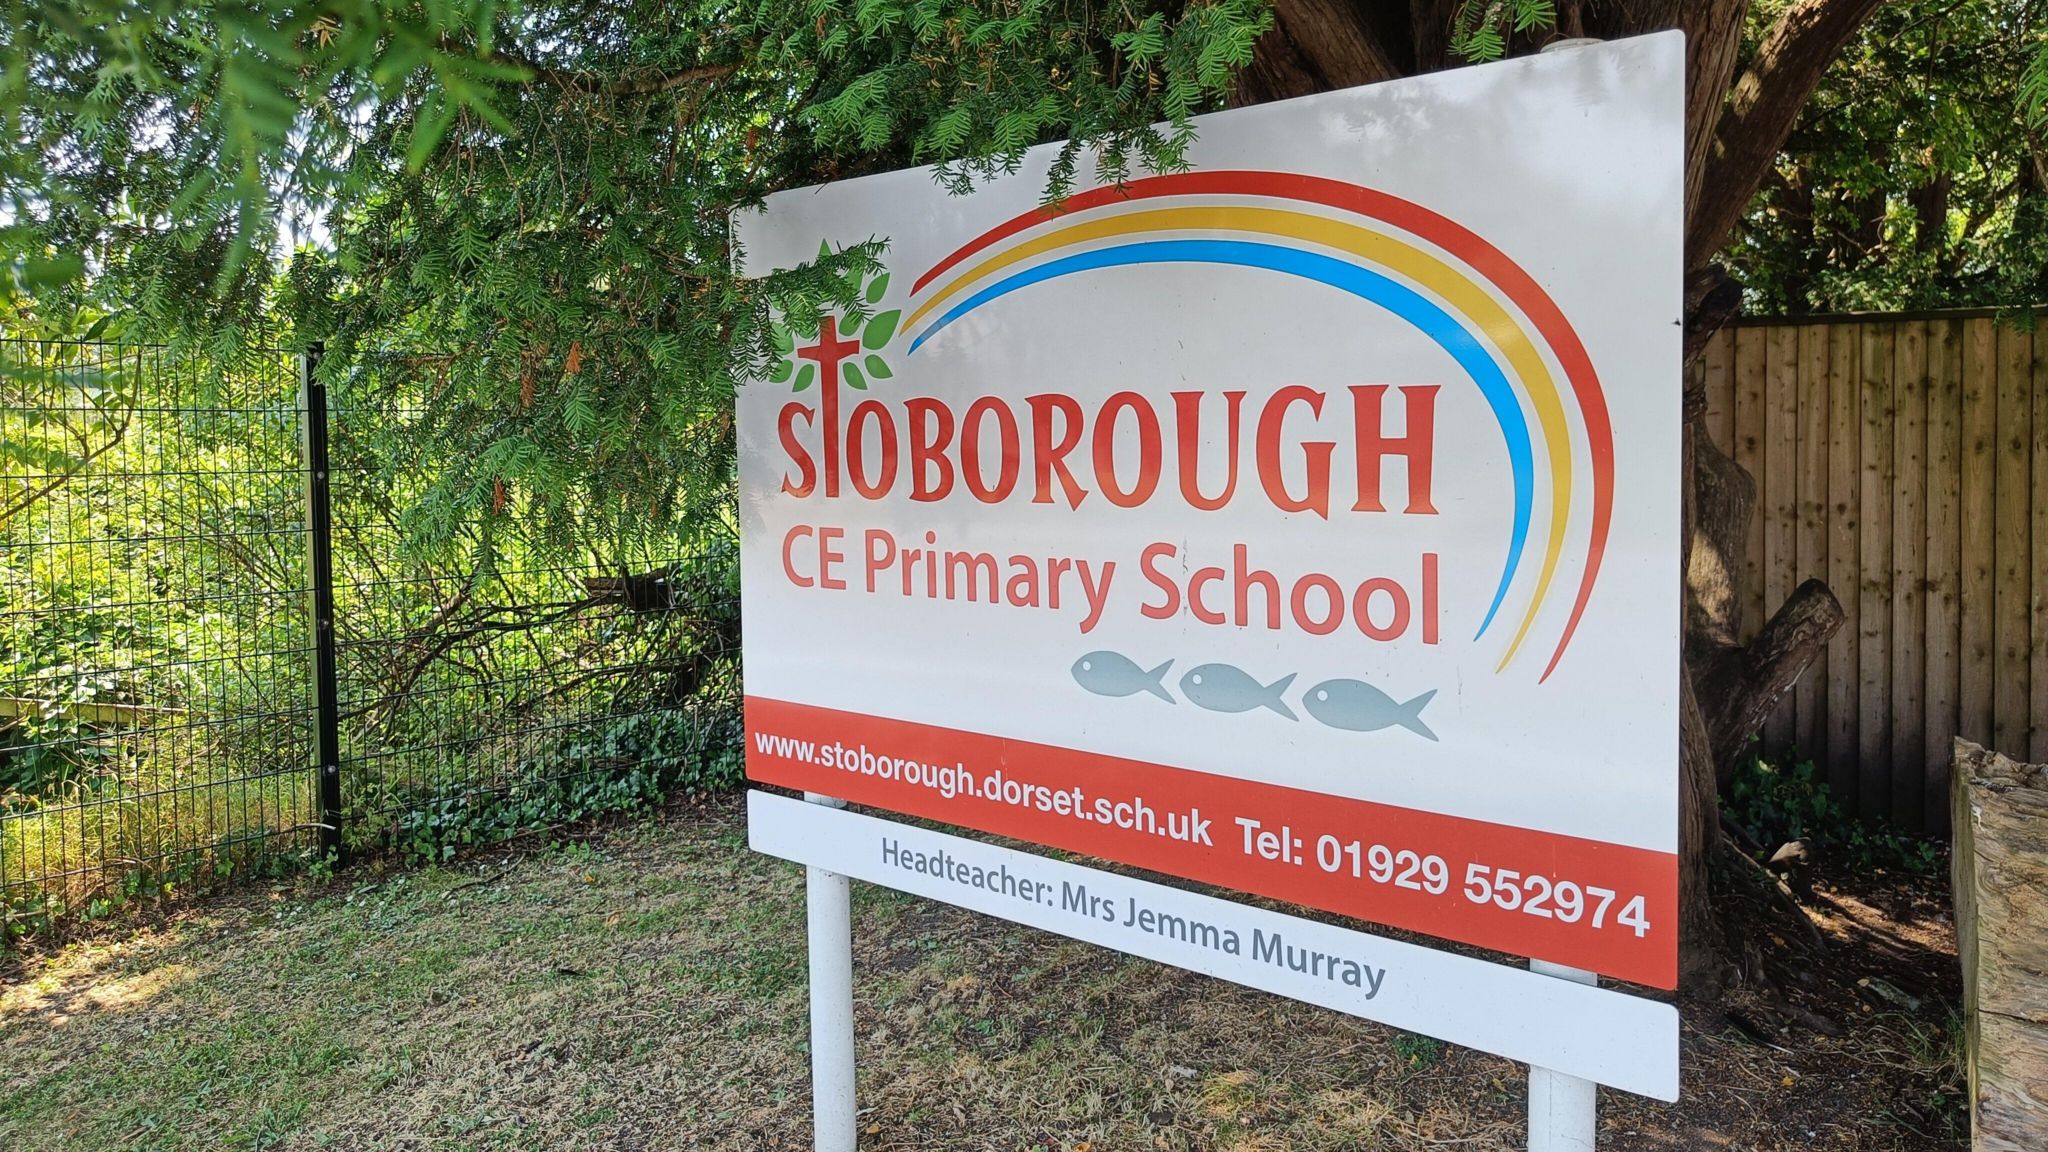 A sign outside the school which is white and red with a rainbow design on. It says Stoborough CE Primary School